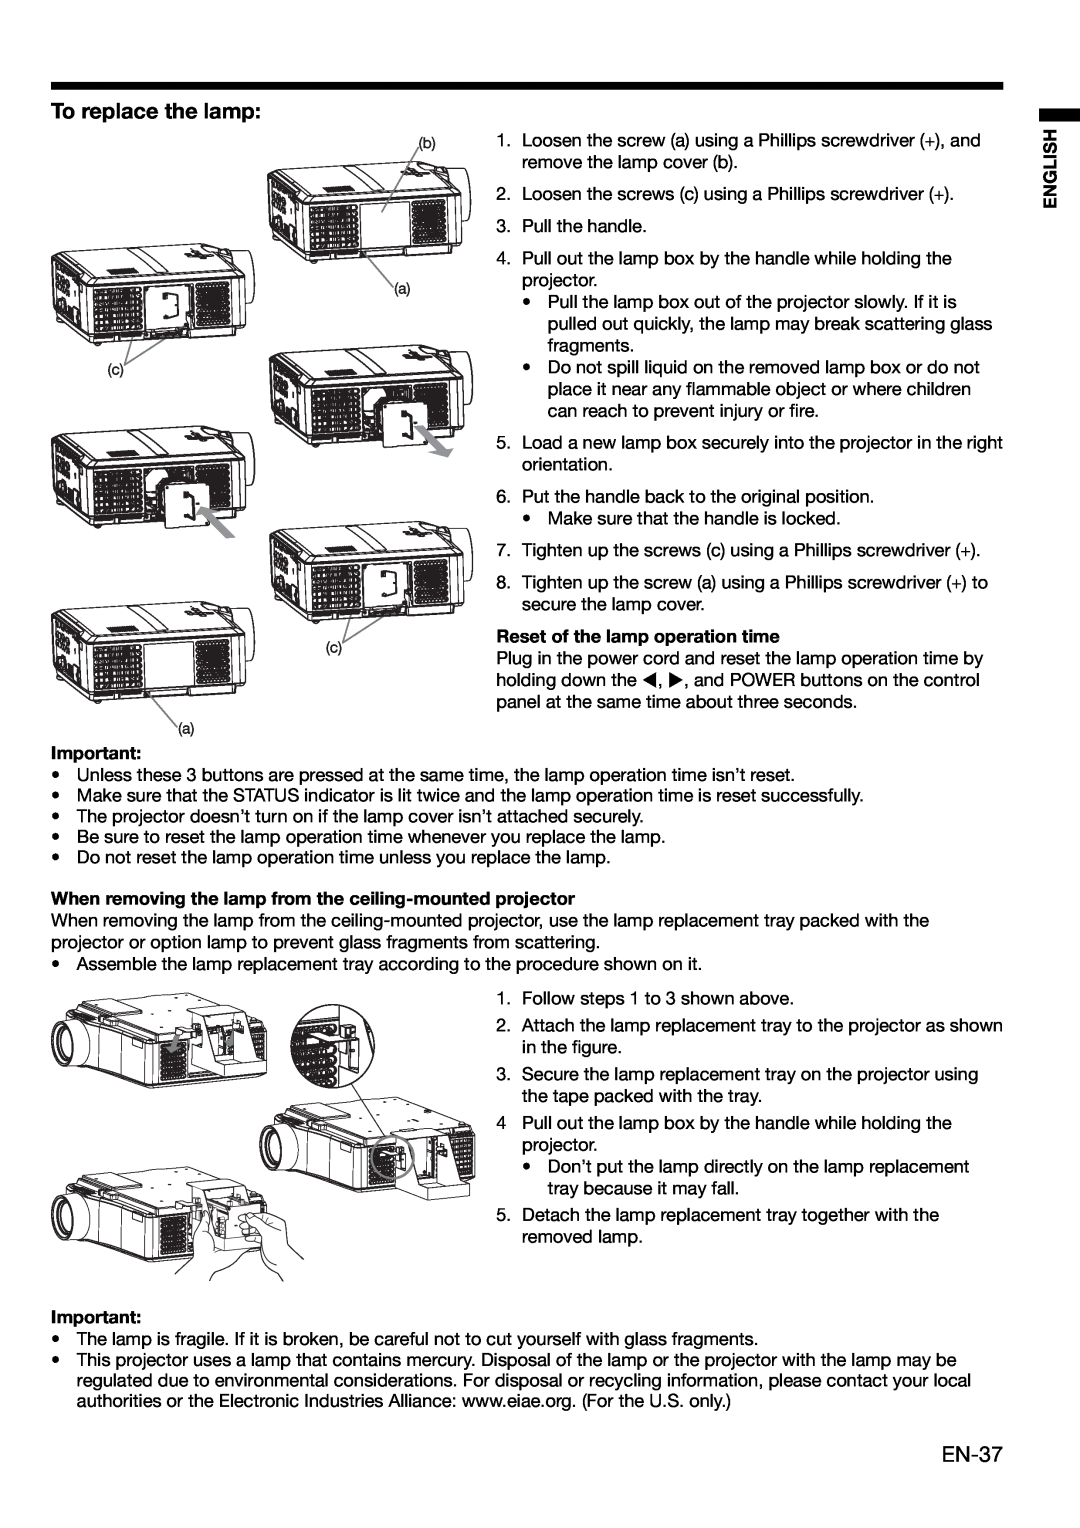 Mitsubishi Electronics XL650U user manual To replace the lamp, EN-37, English, Reset of the lamp operation time 